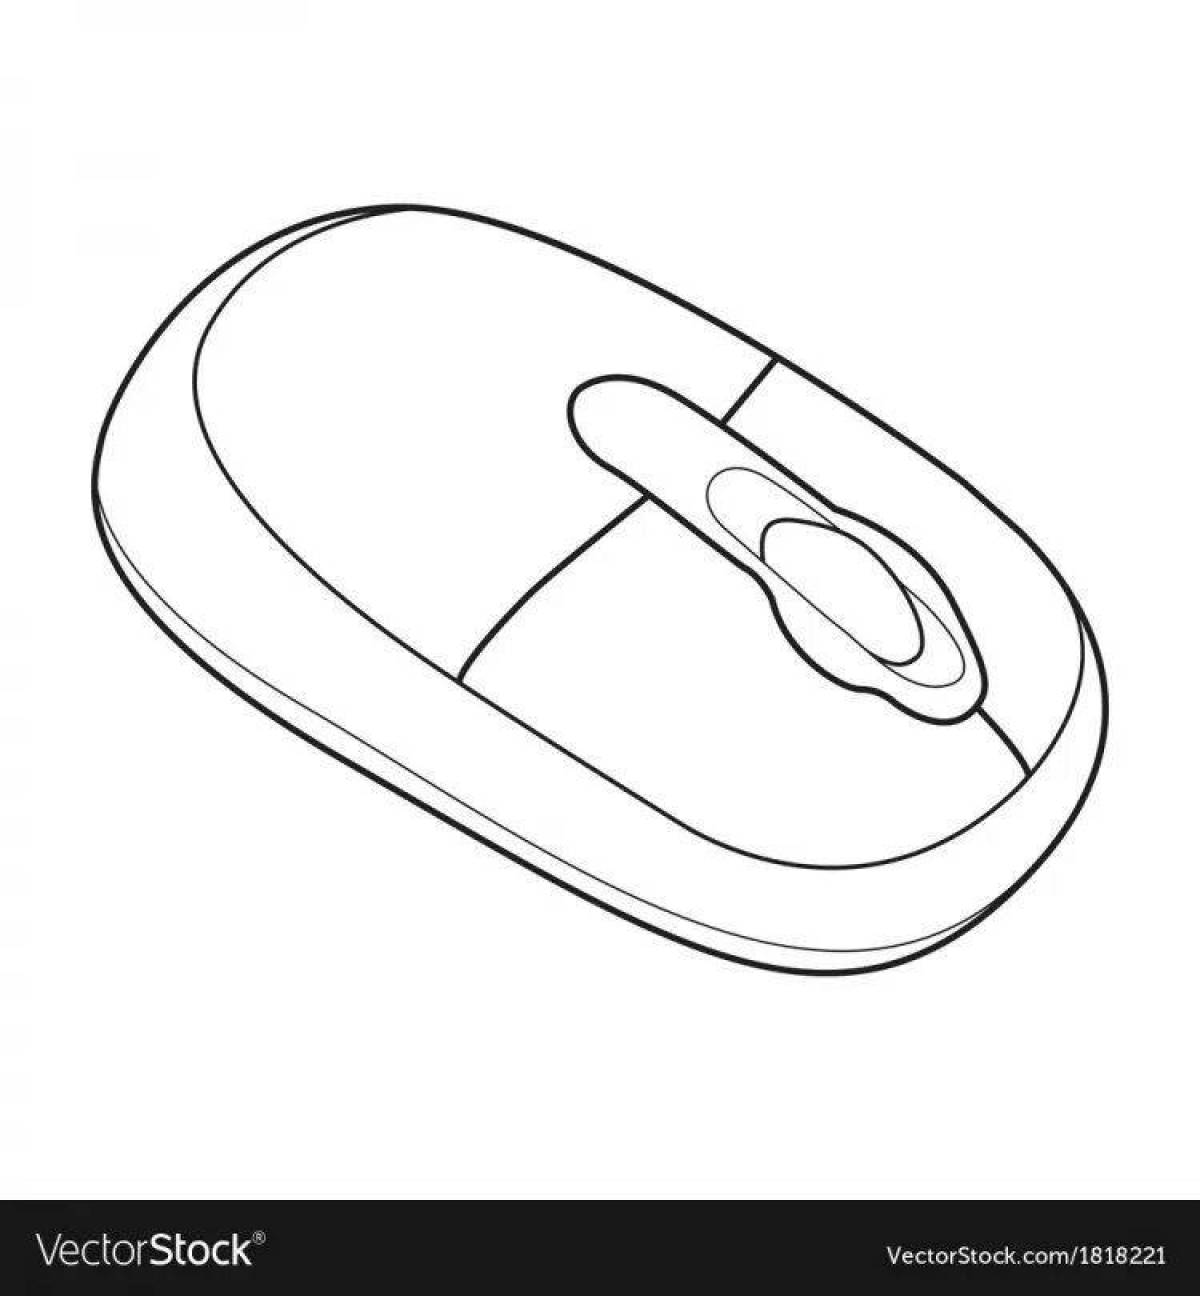 Computer mouse #12